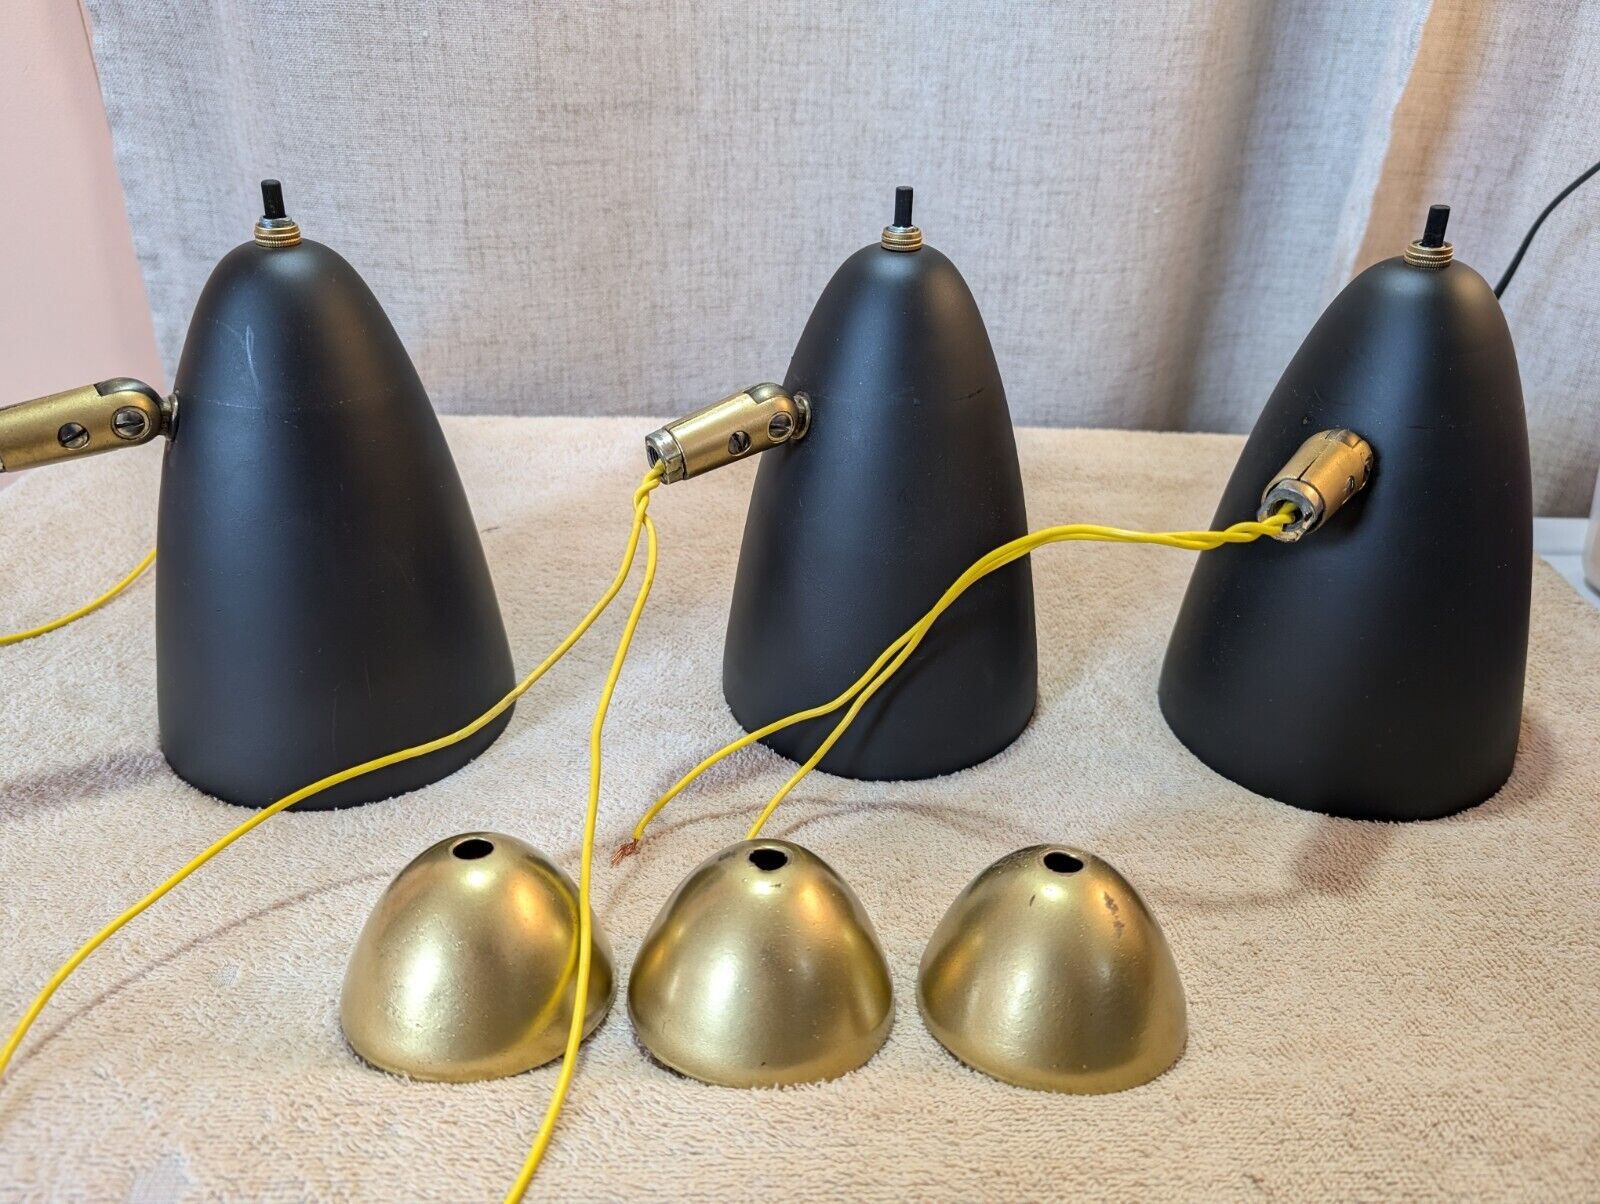 Lot of 3 Gerald Thurston Lightolier Cone Bullet Shades For Tension Pole Lamp MCM